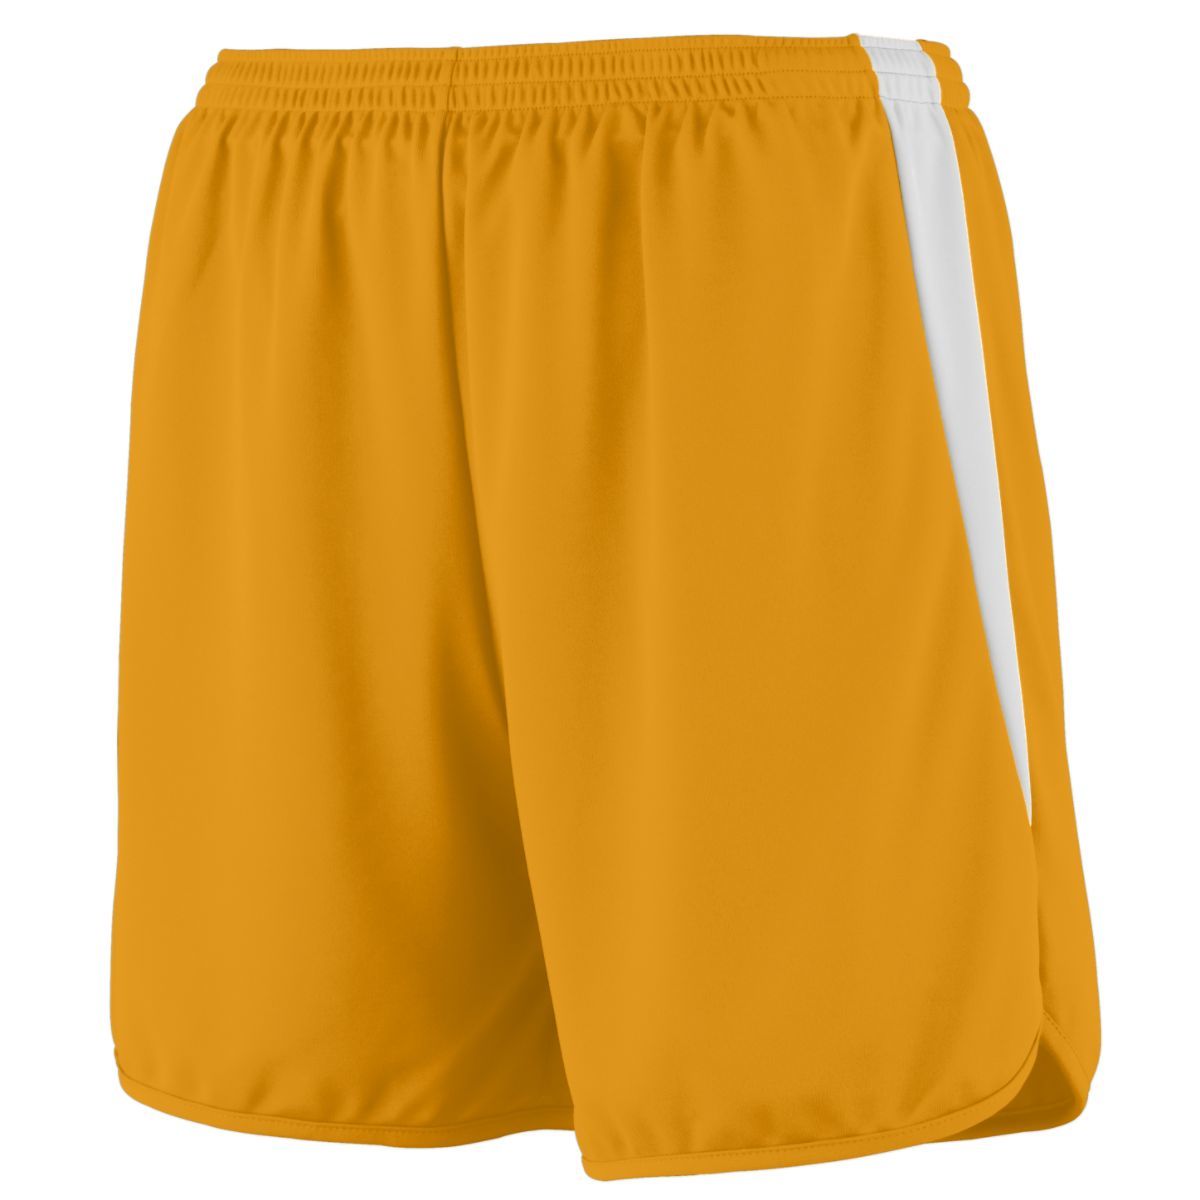 Augusta Sportswear Rapidpace Track Shorts in Gold/White  -Part of the Adult, Adult-Shorts, Augusta-Products, Track-Field product lines at KanaleyCreations.com